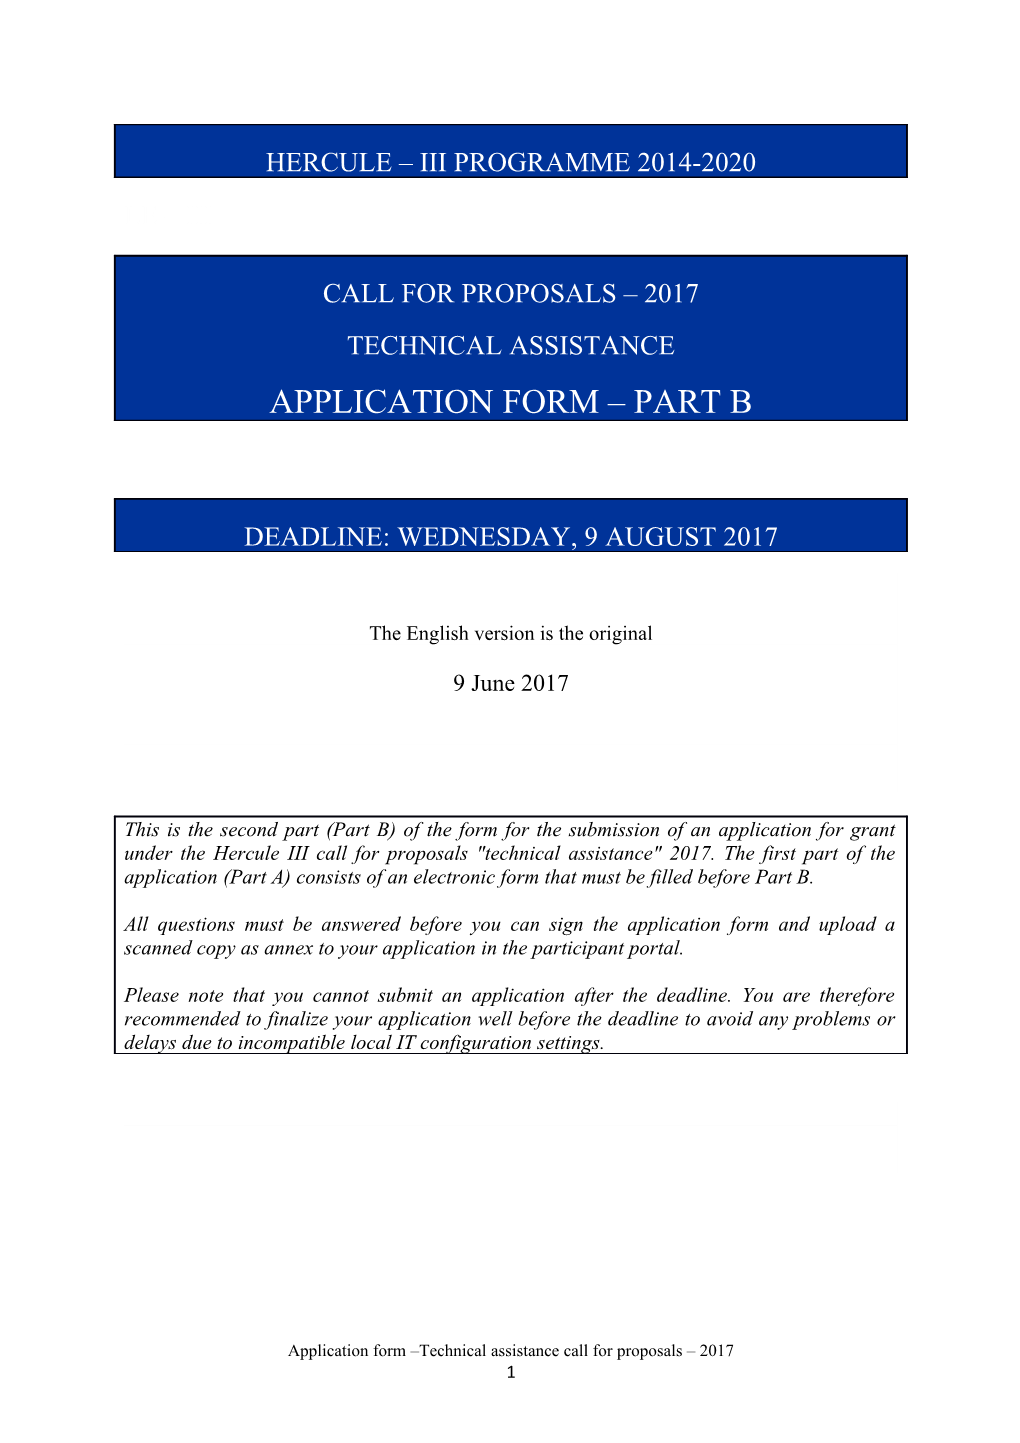 Hercule III Programme - Call for Proposals 2017 - Technical Assistance - Application Form